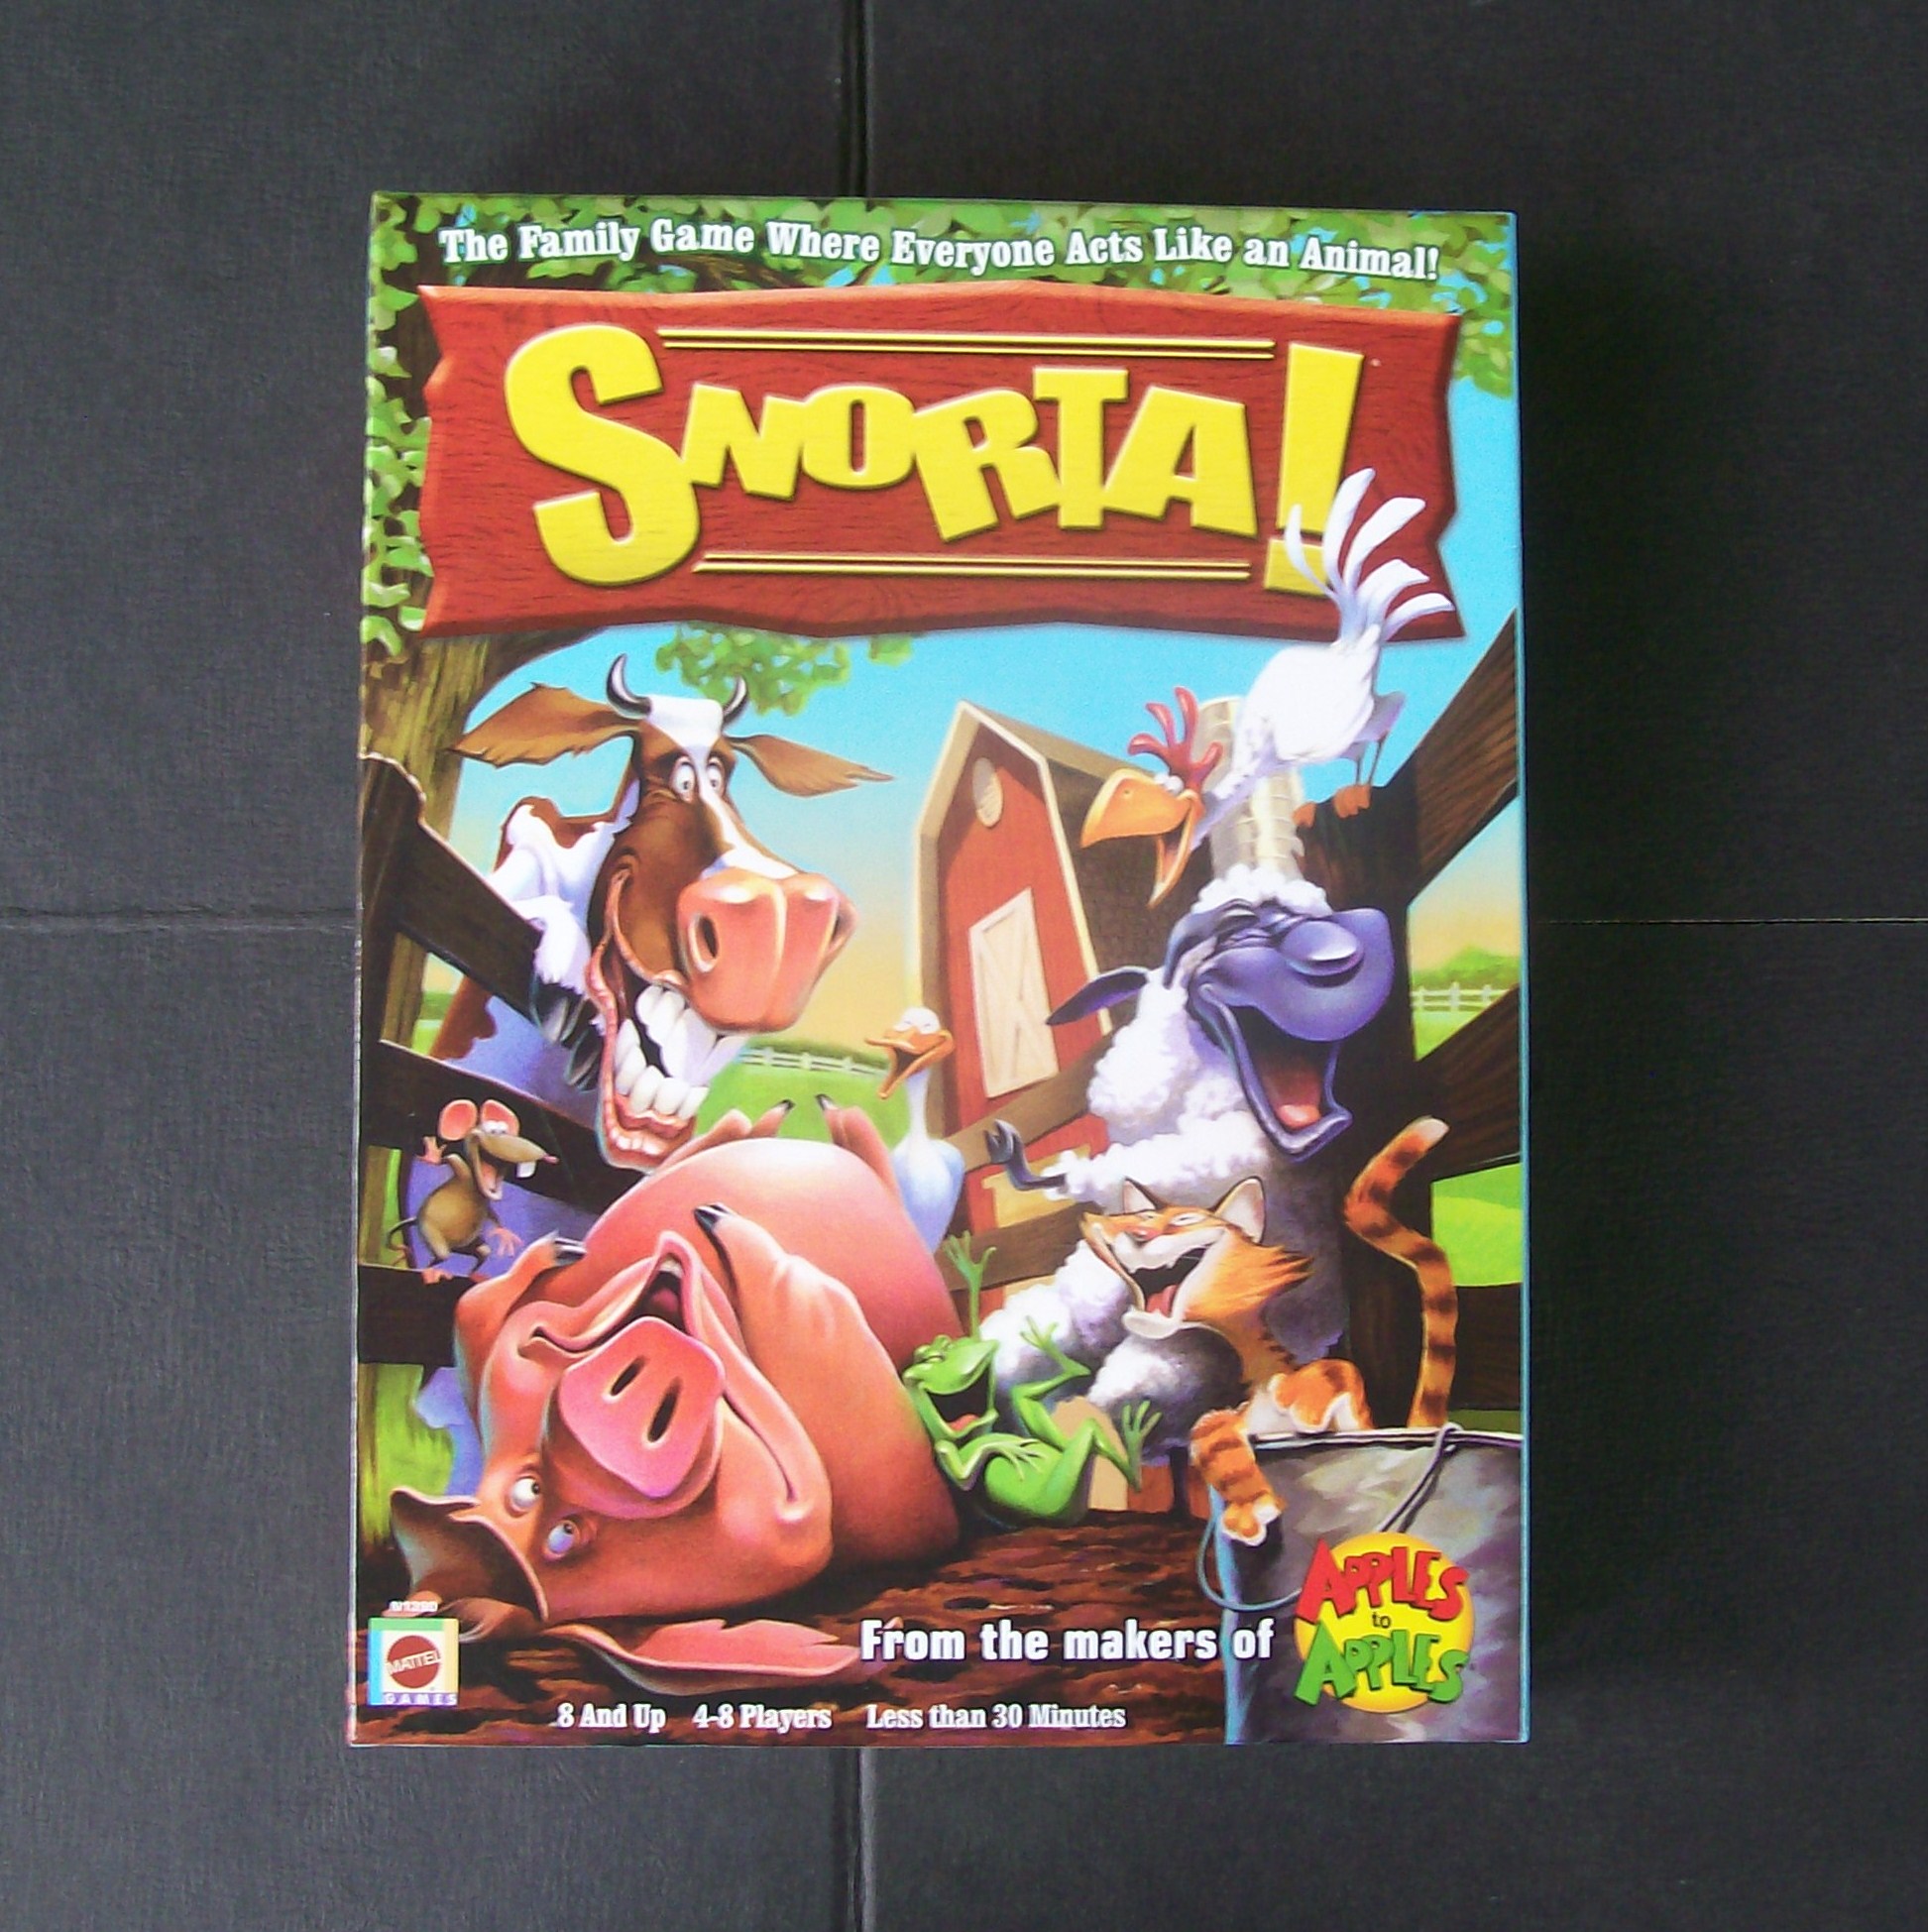 Family Game Night Fun with the Animal Game of Snorta!